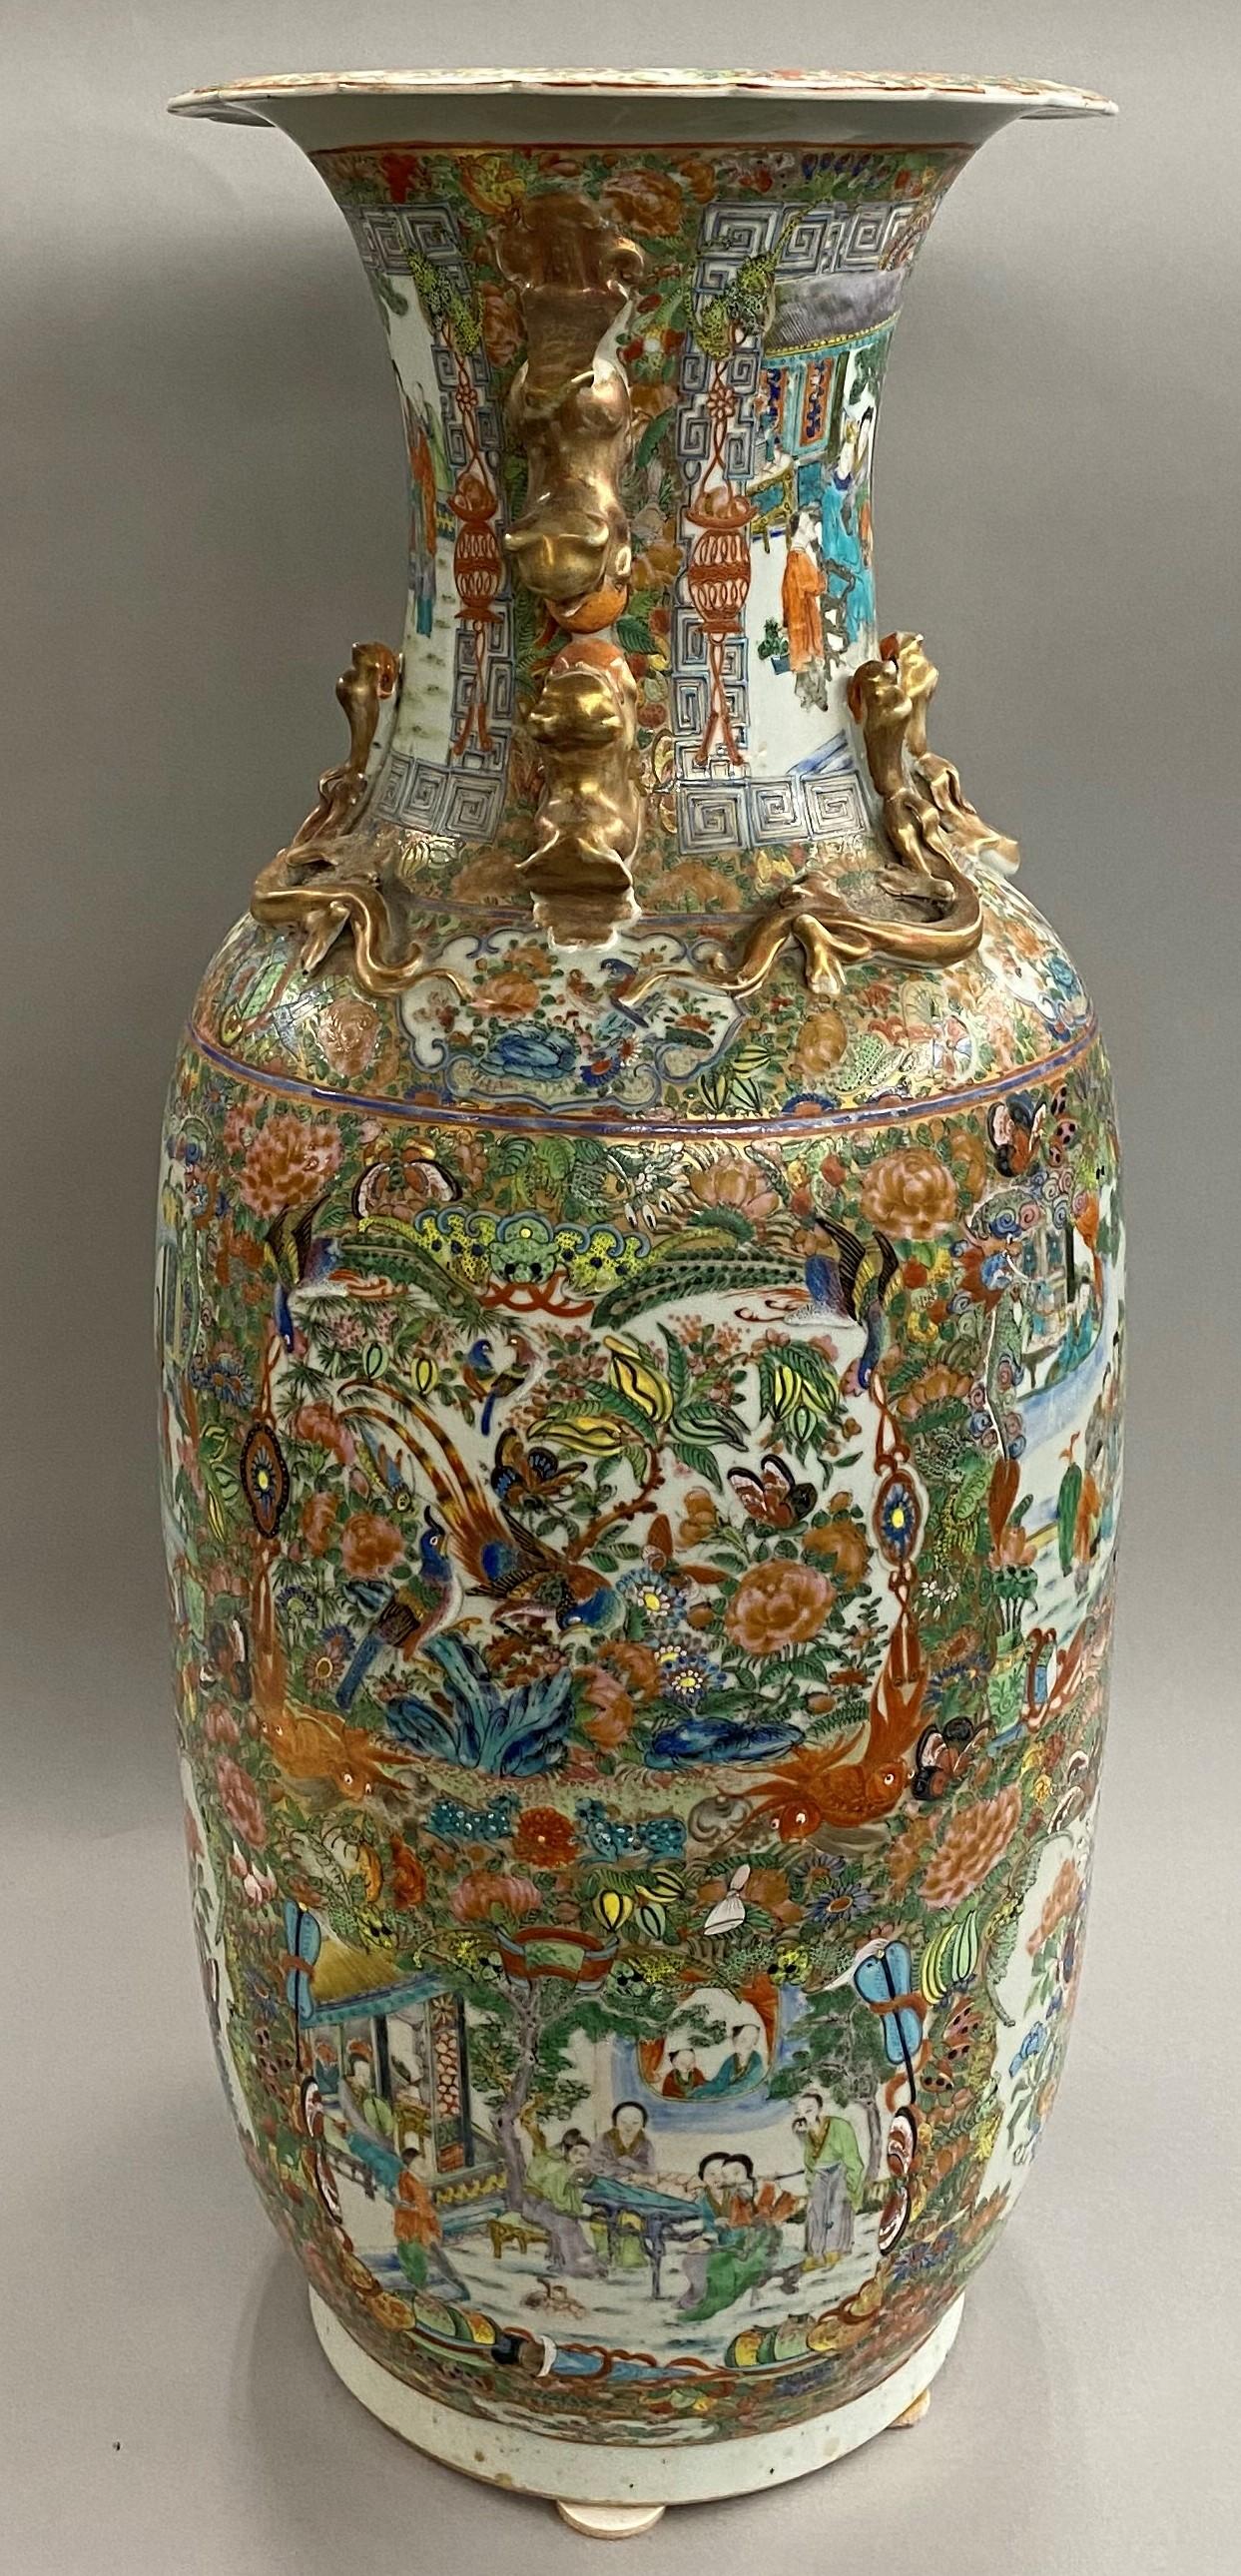 A fine Chinese porcelain polychrome rose medallion palace size baluster form vase with multiple panels of figures, birds, and flowers, along with applied foo dogs and serpents around the neck, and scalloped rim. Dates to the 1830s or 1840s in very